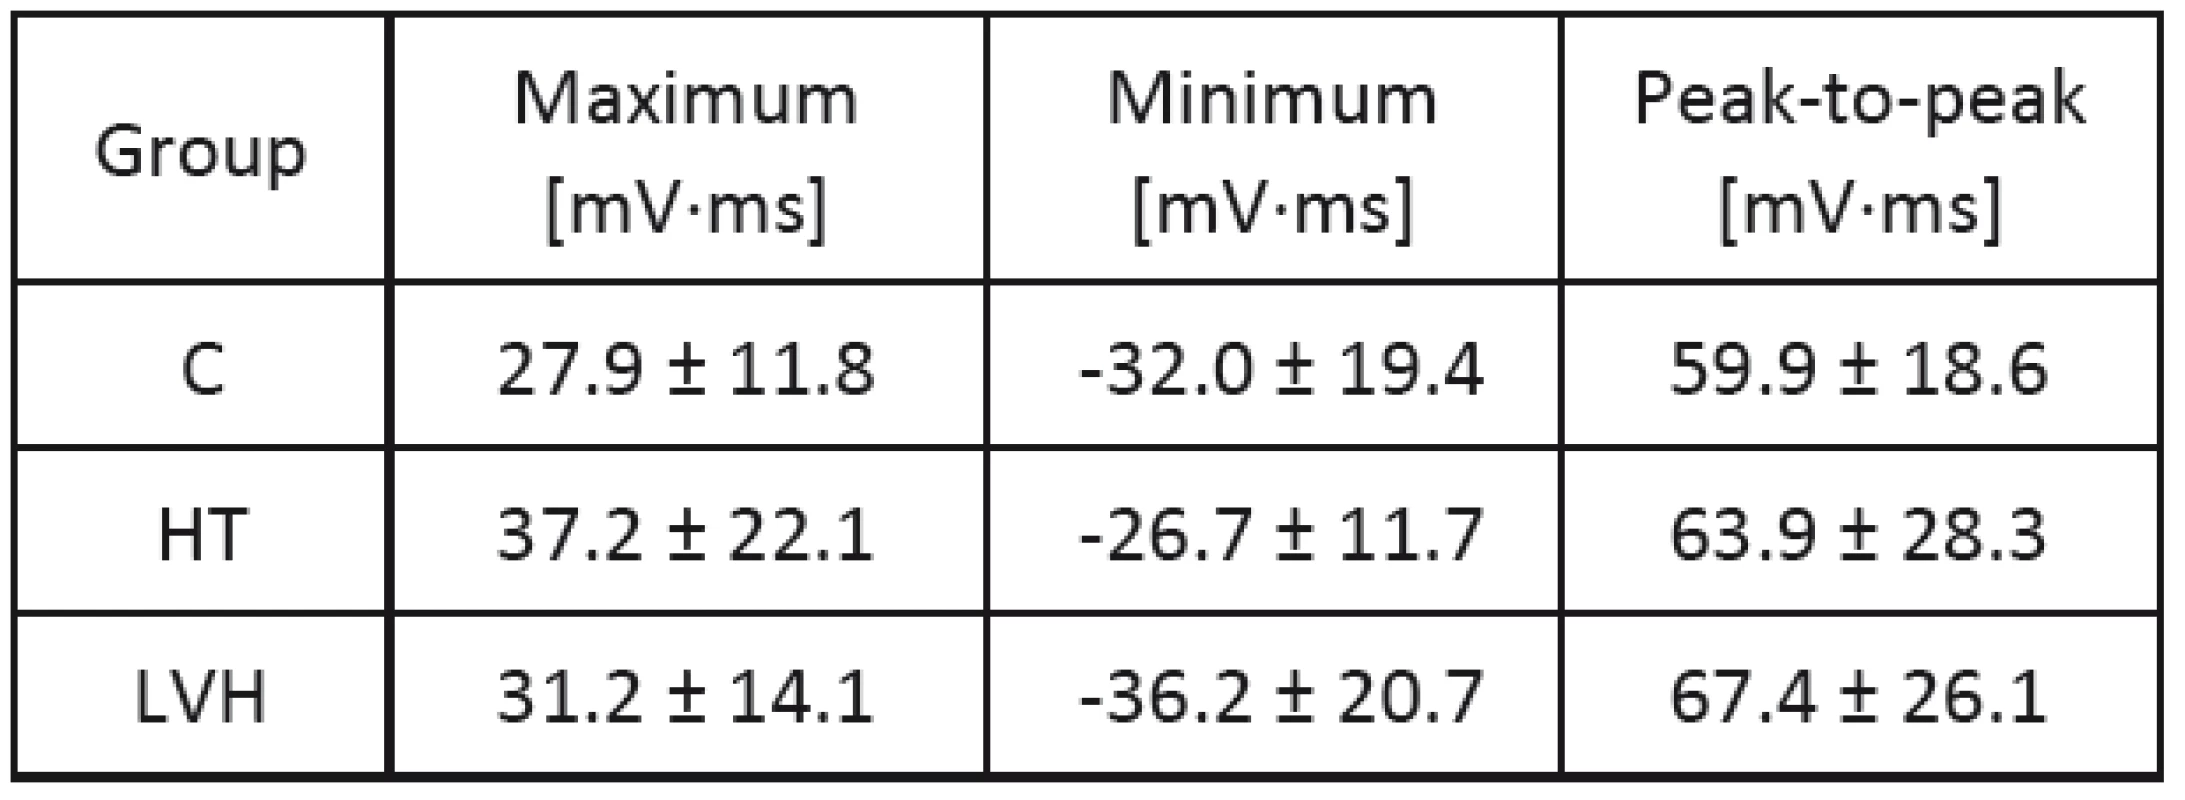 Extreme values of IIM QRS (mean ± standard deviation).